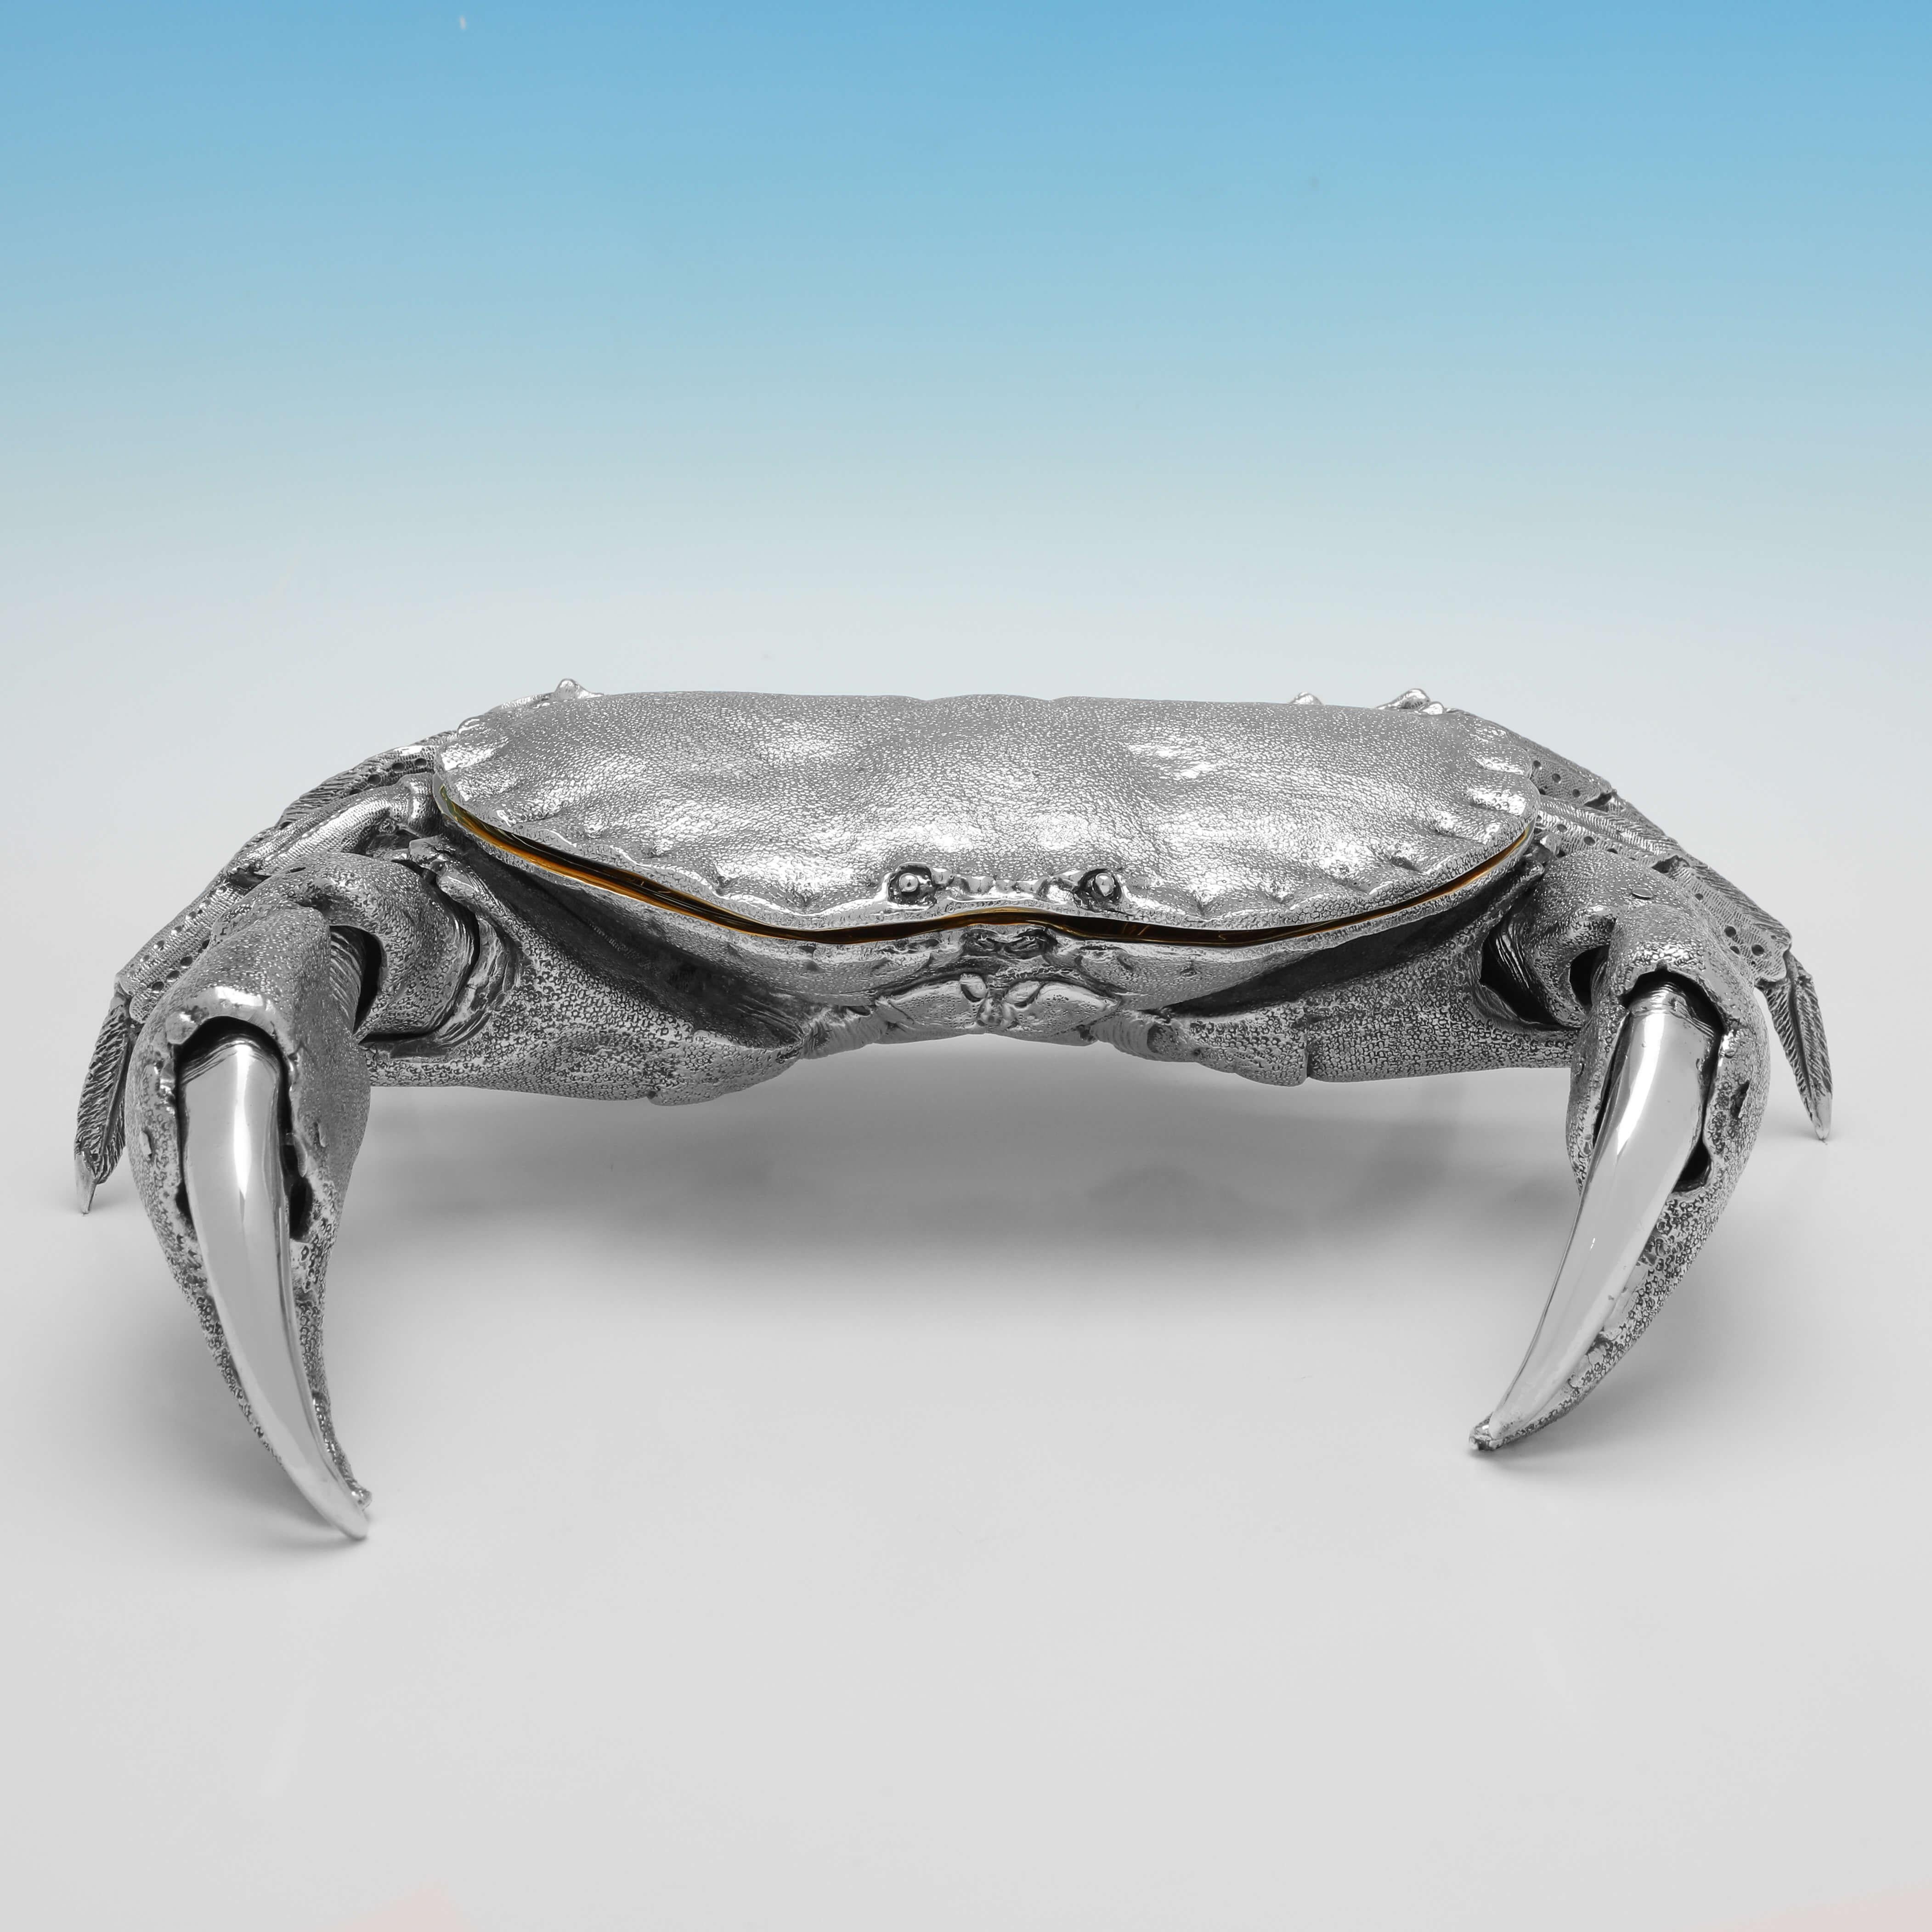 Contemporary Life Sized & Heavy Sterling Silver Crab Model, Crab Serving Dish, Made in 2007